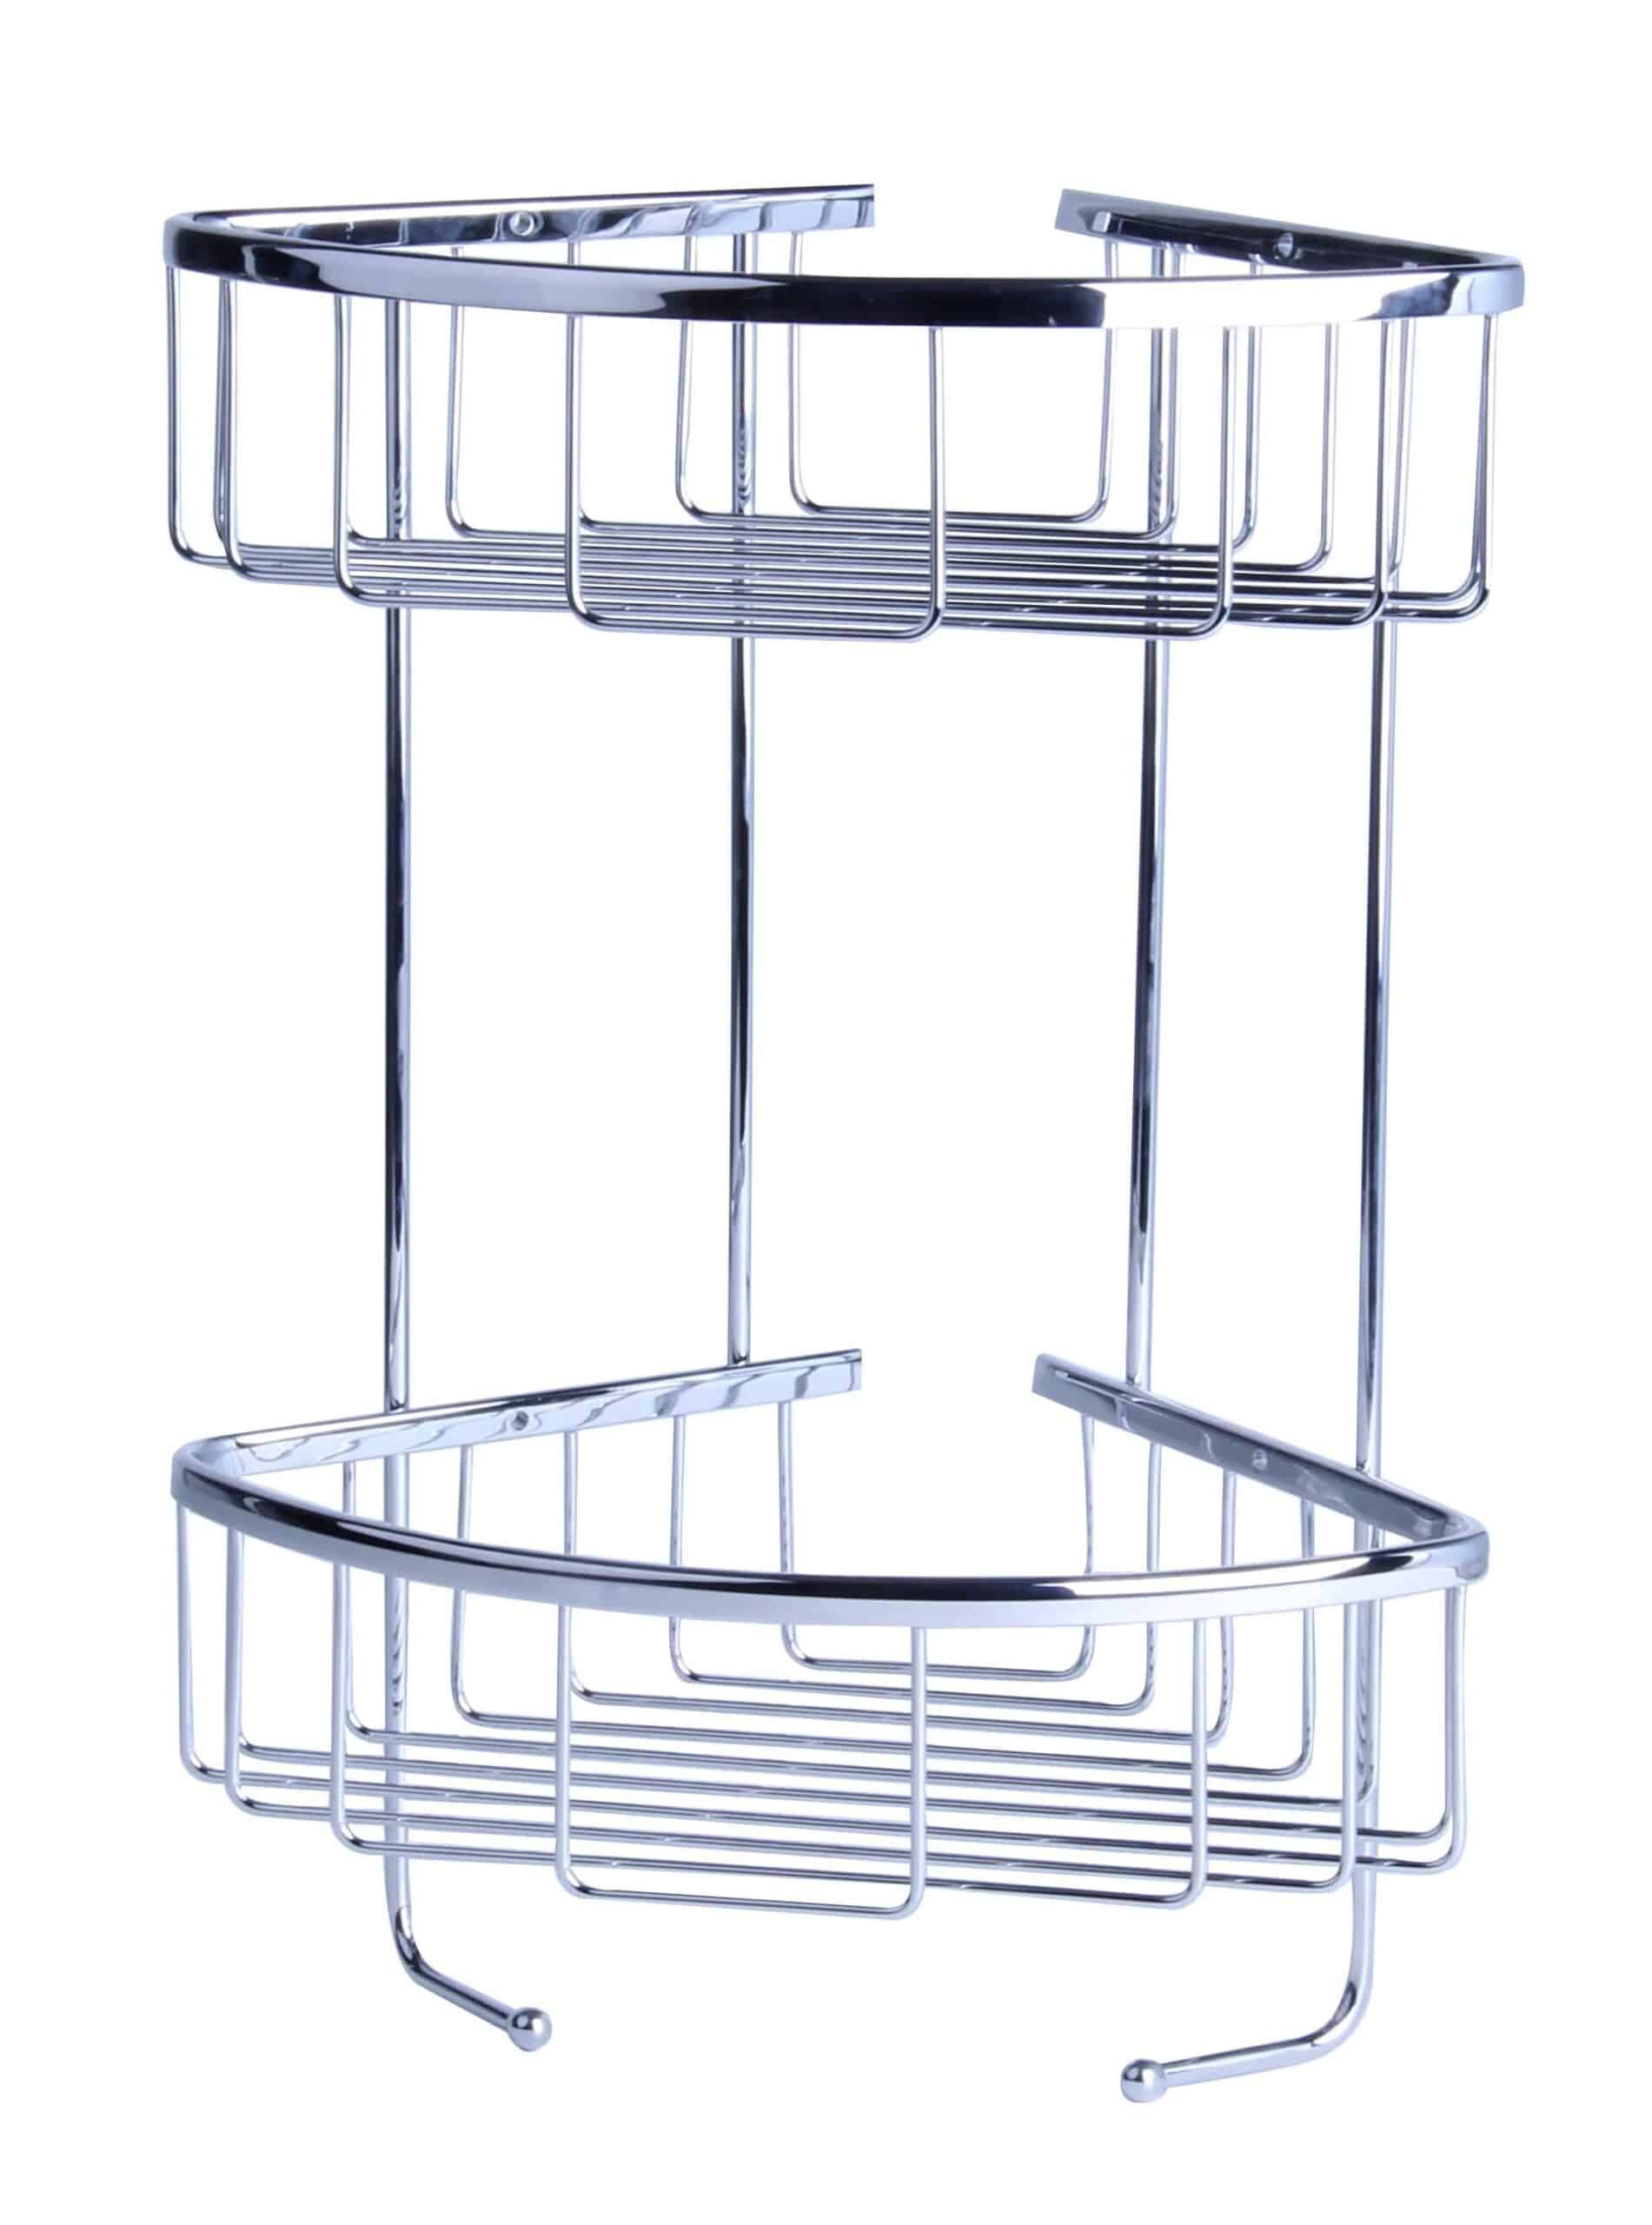 https://nikobathrooms.ie/wp-content/uploads/2017/01/AB109-Tier-Shower-Caddy-Hooks-Chrome-1-scaled.jpg